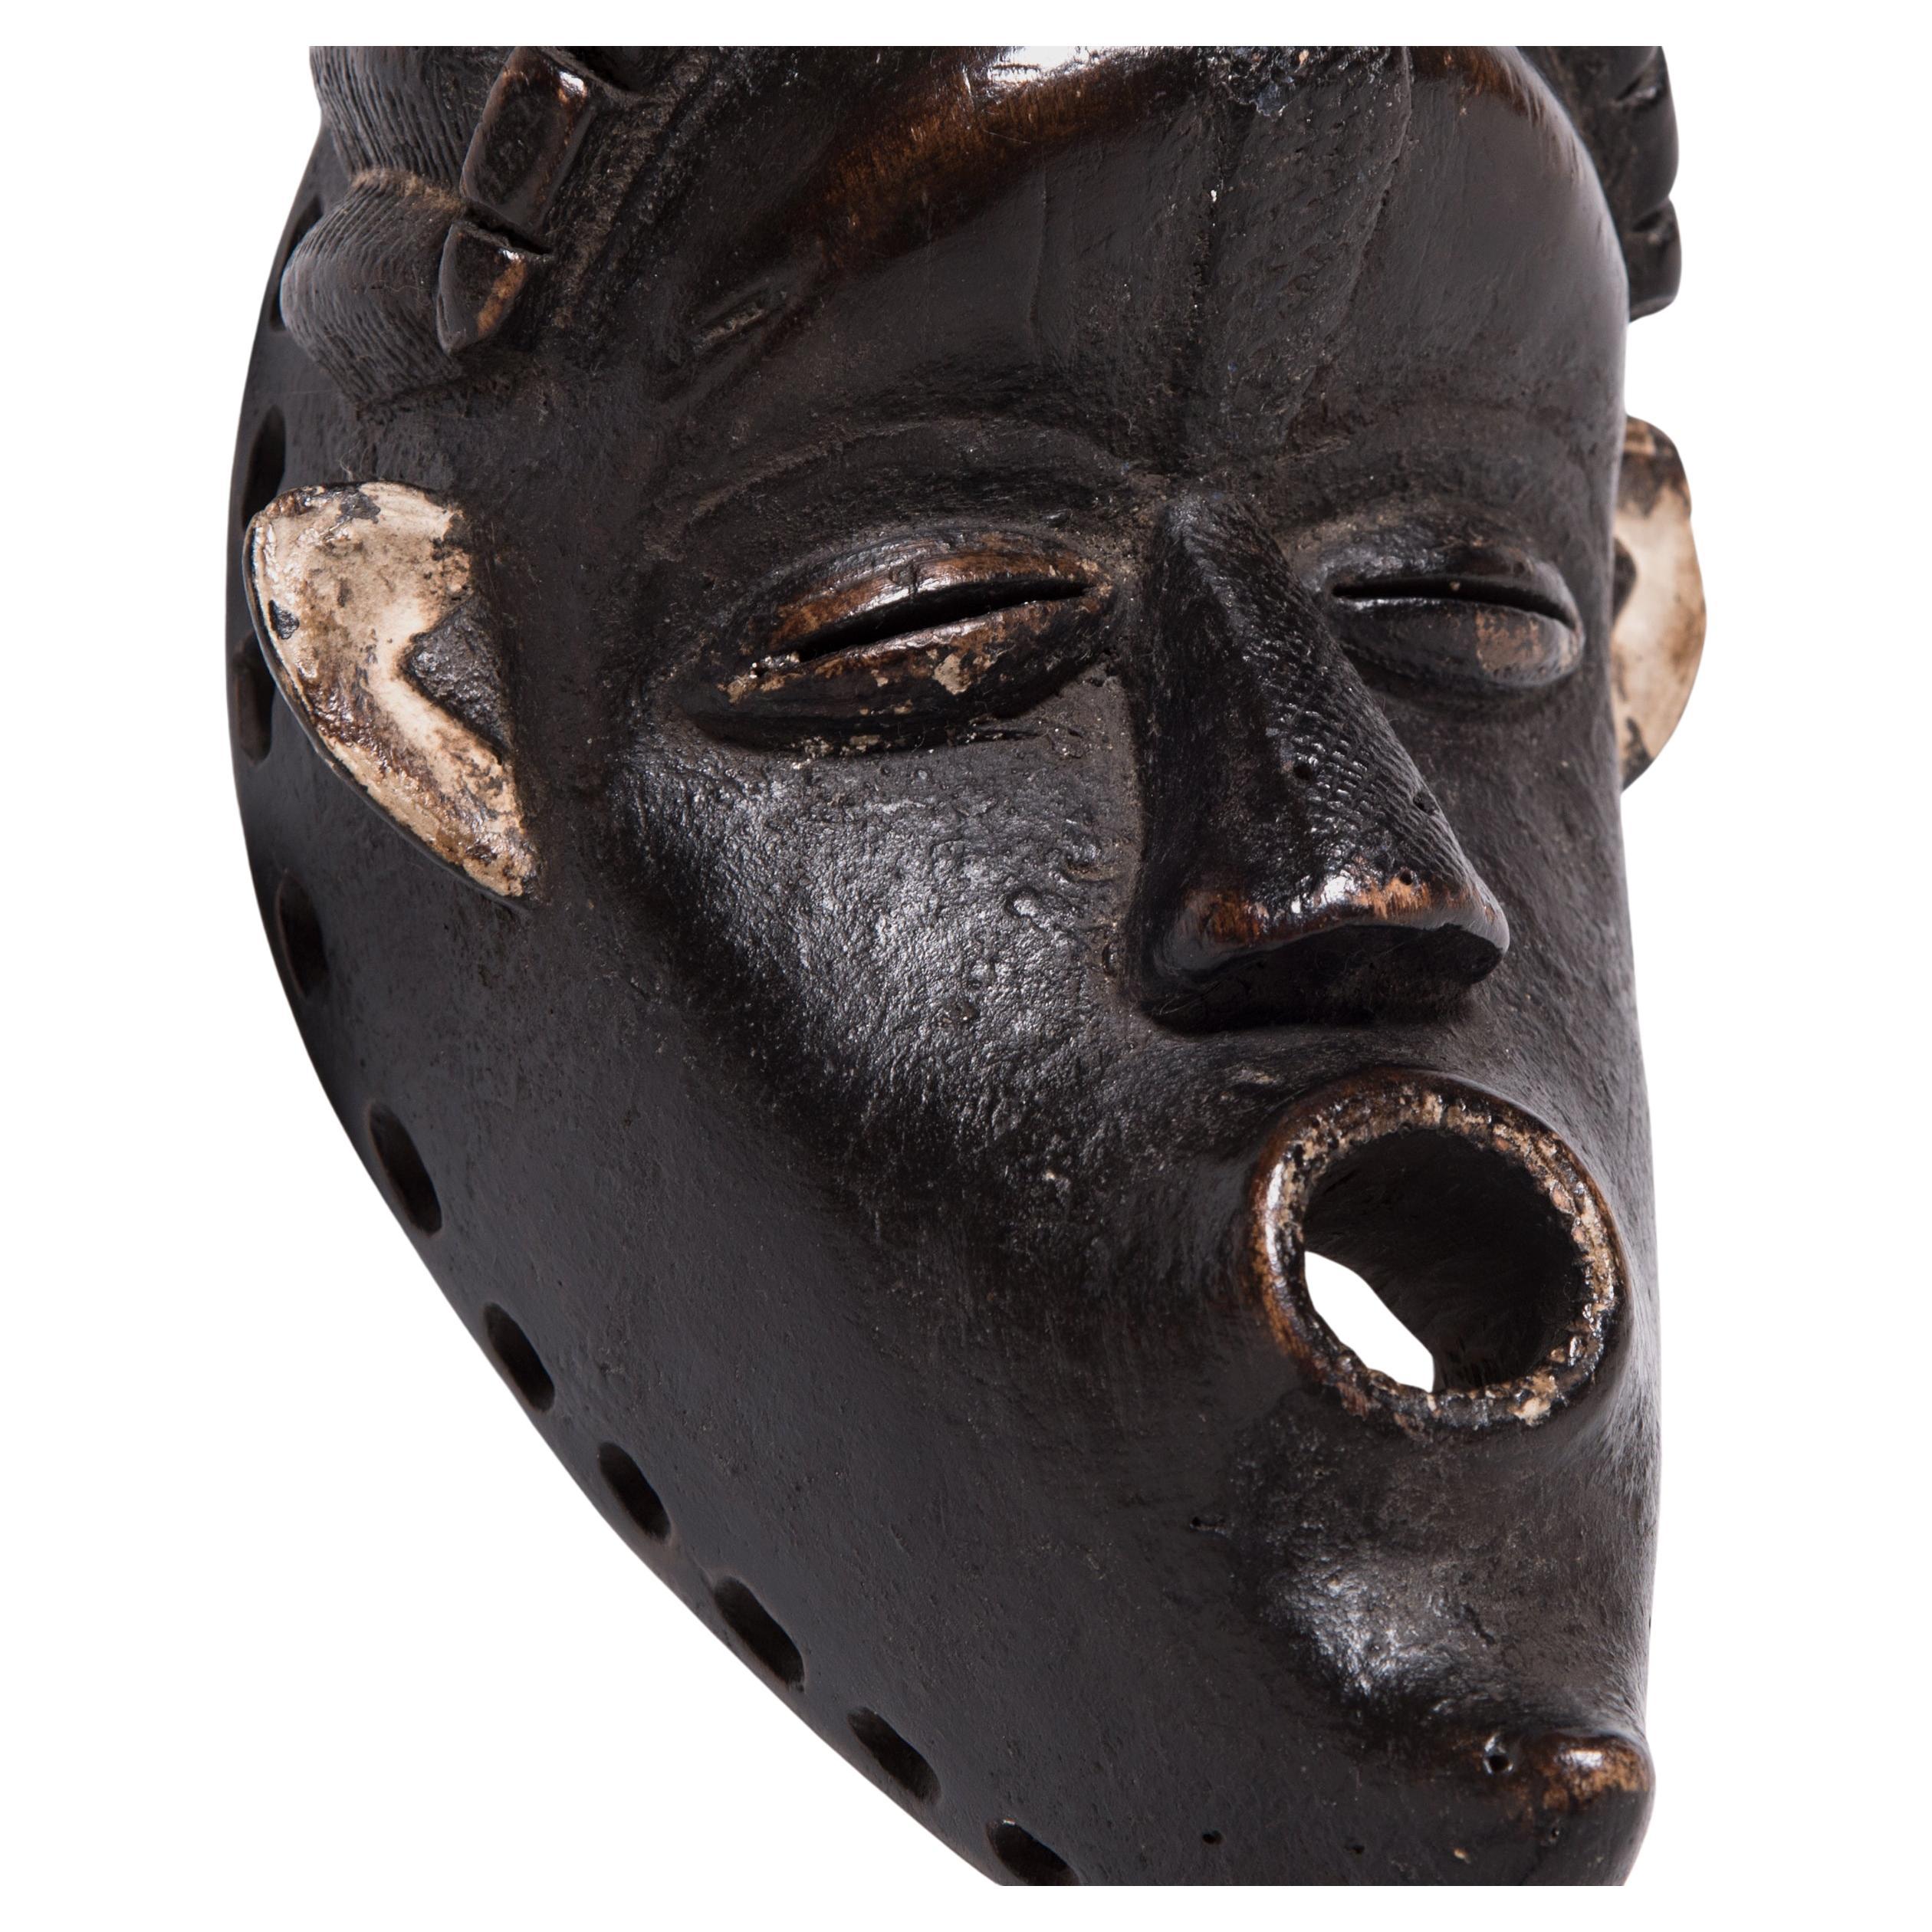 Covered with an extraordinary black crusted patina, this wooden Liberian mask was hand-crafted in the style of the Bassa ethnic group. Bassa communities have a number of rich masking traditions. Among these are Chu-Den-Zo and No, both of which